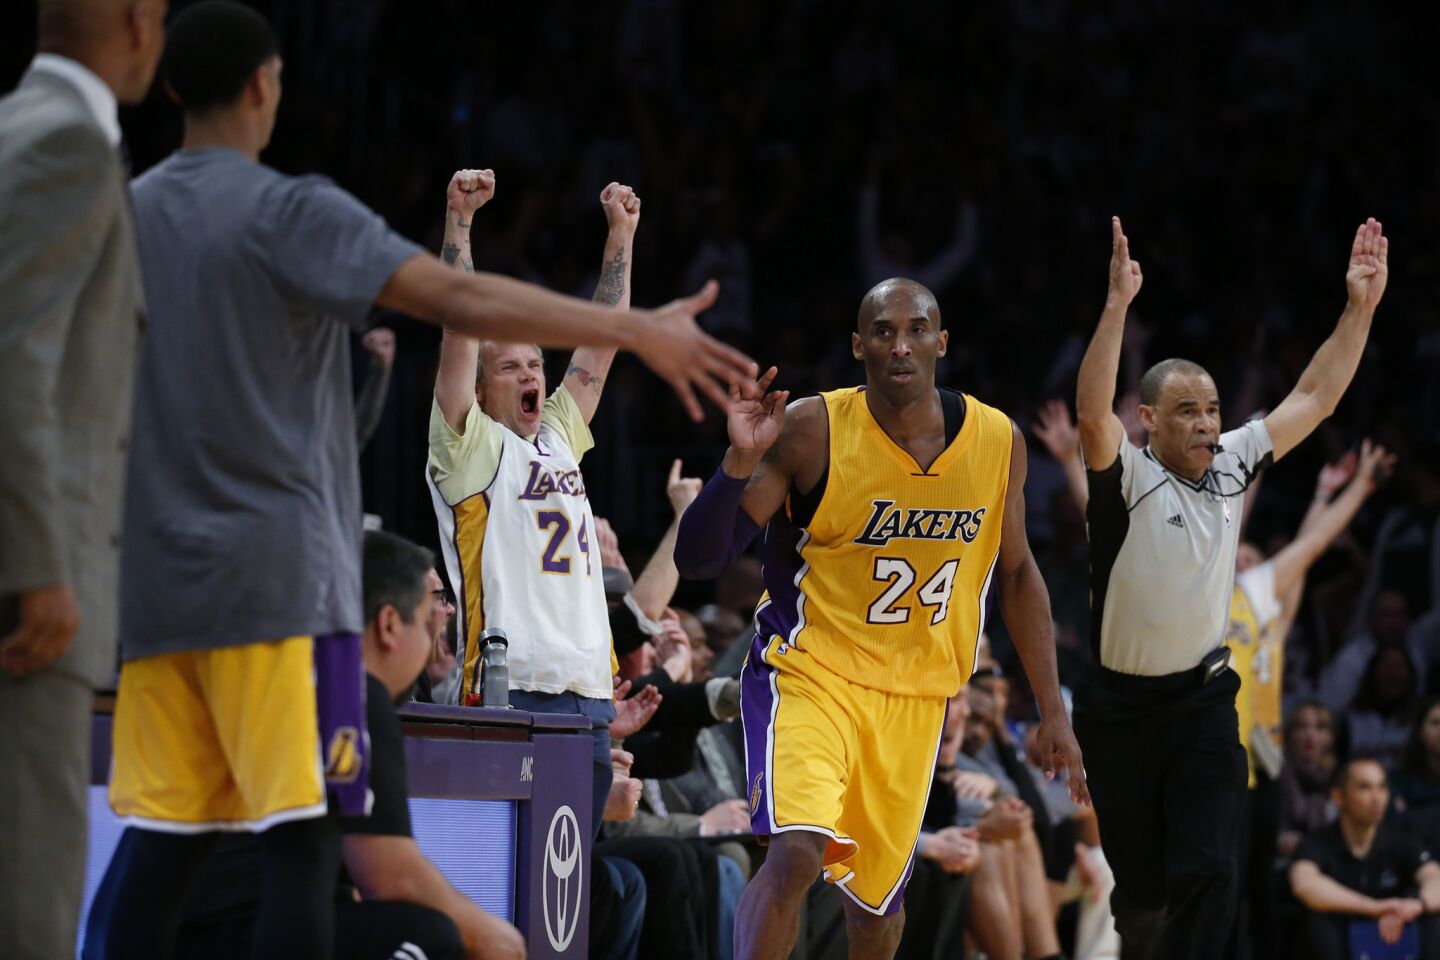 akers fans including Flea, celebrate after Kobe Bryant hit a three-pointer late in the fourth quarter of a game against the Timberwolves. The Lakers won, 119-115.